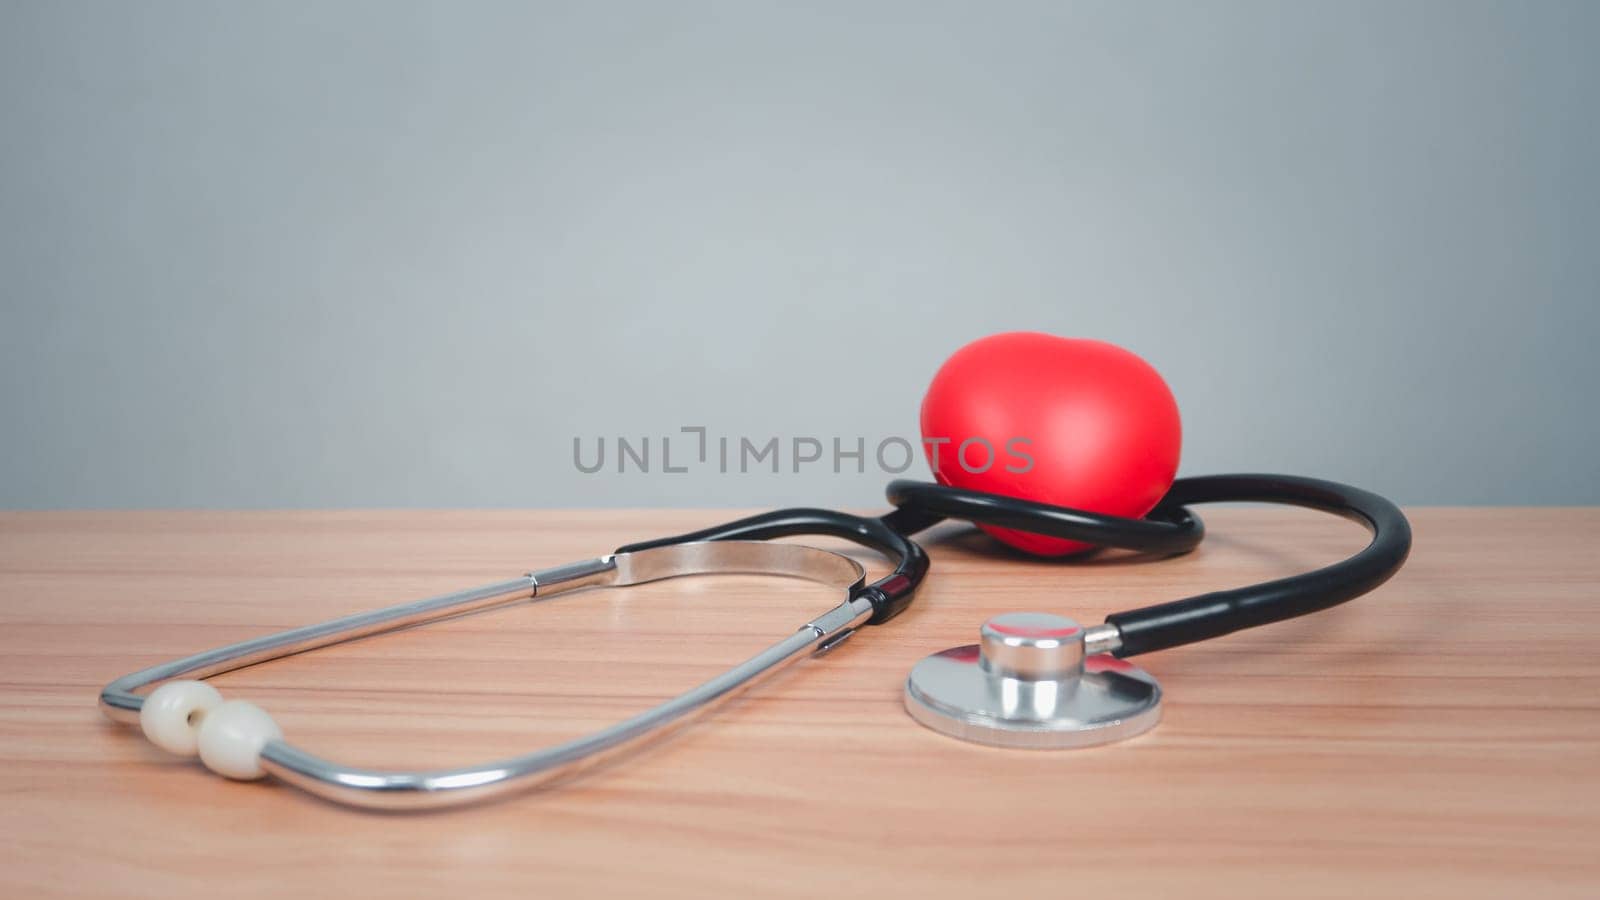 Red heart with headphones on a wooden table background. Medical and healthcare concepts. by Unimages2527